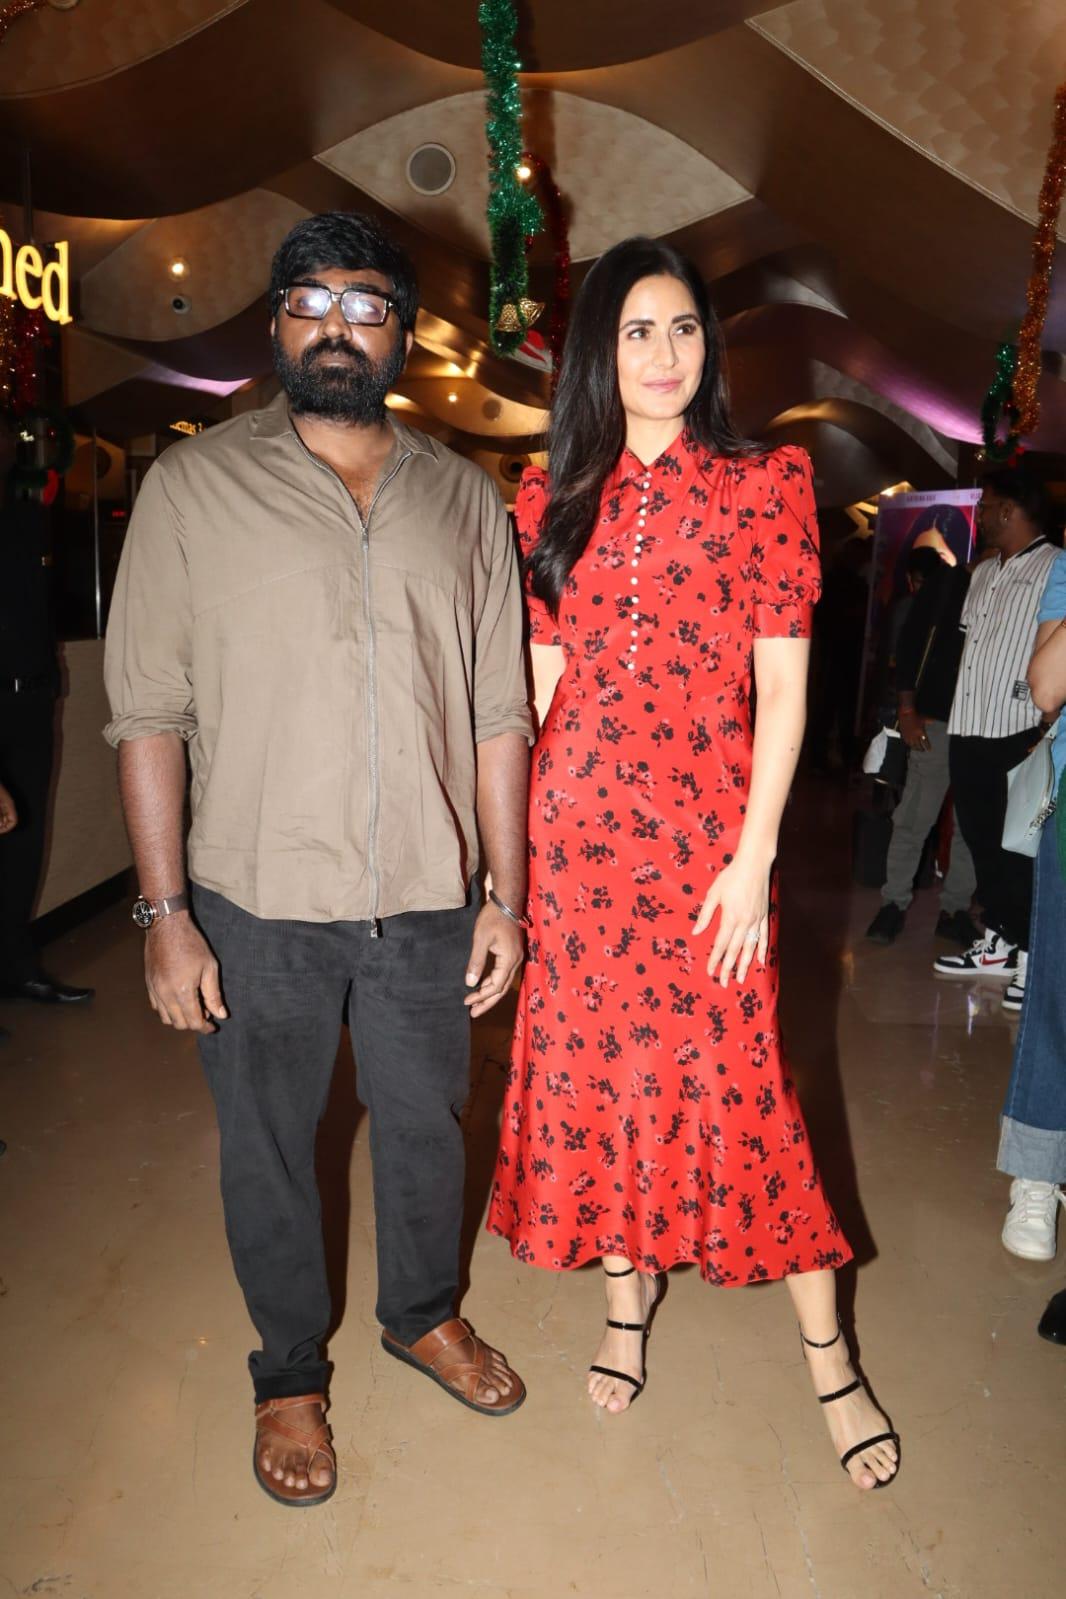 Katrina Kaif and Vijay Sethupathi play the lead roles in Merry Christmas. They will be seen together for the first time on screen